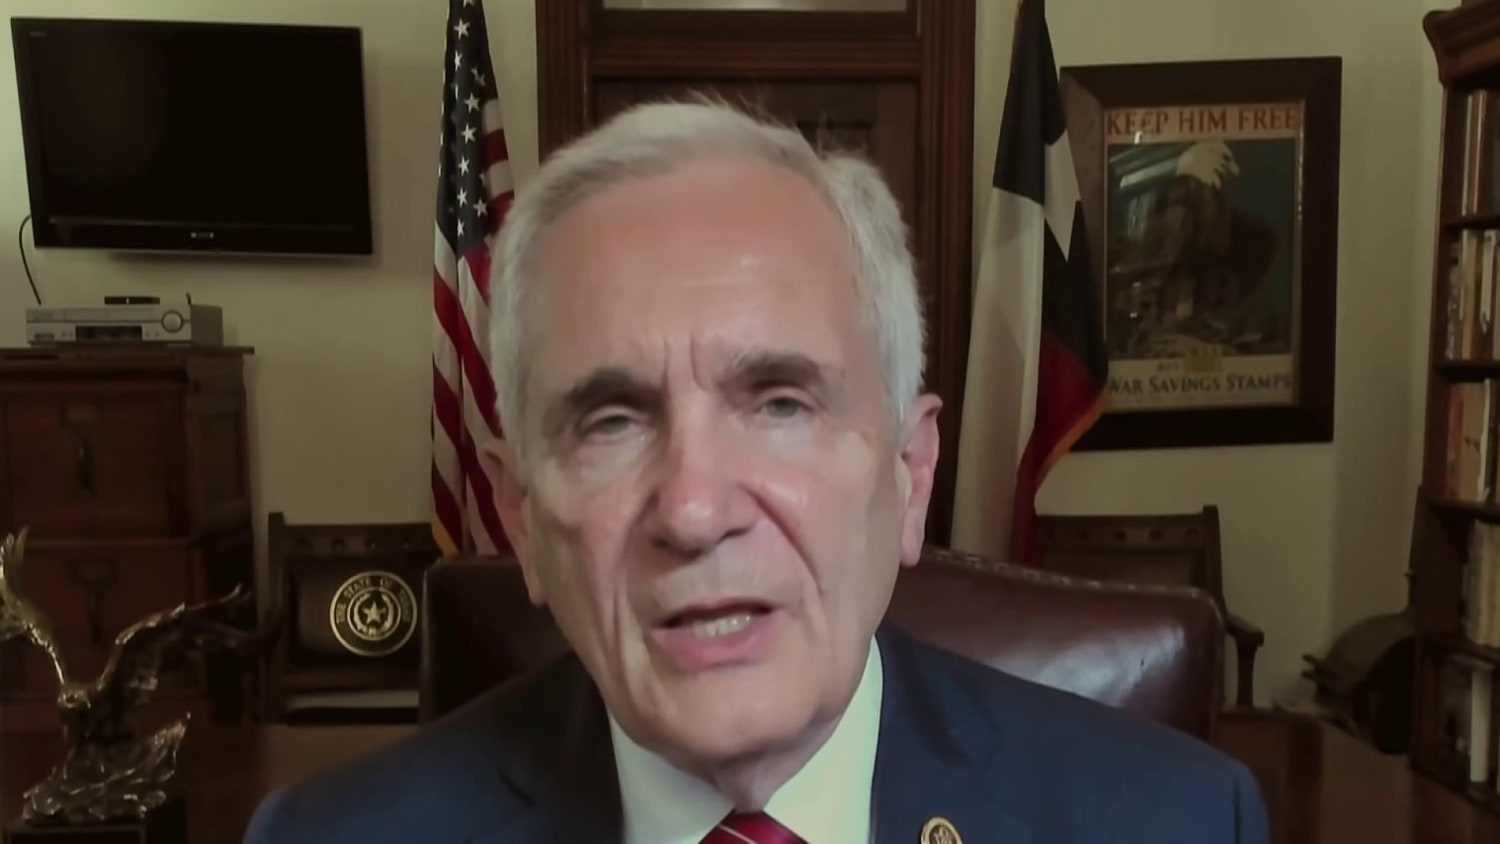 Democrat Rep. Doggett on replacing Biden: "It was time for me to speak up"